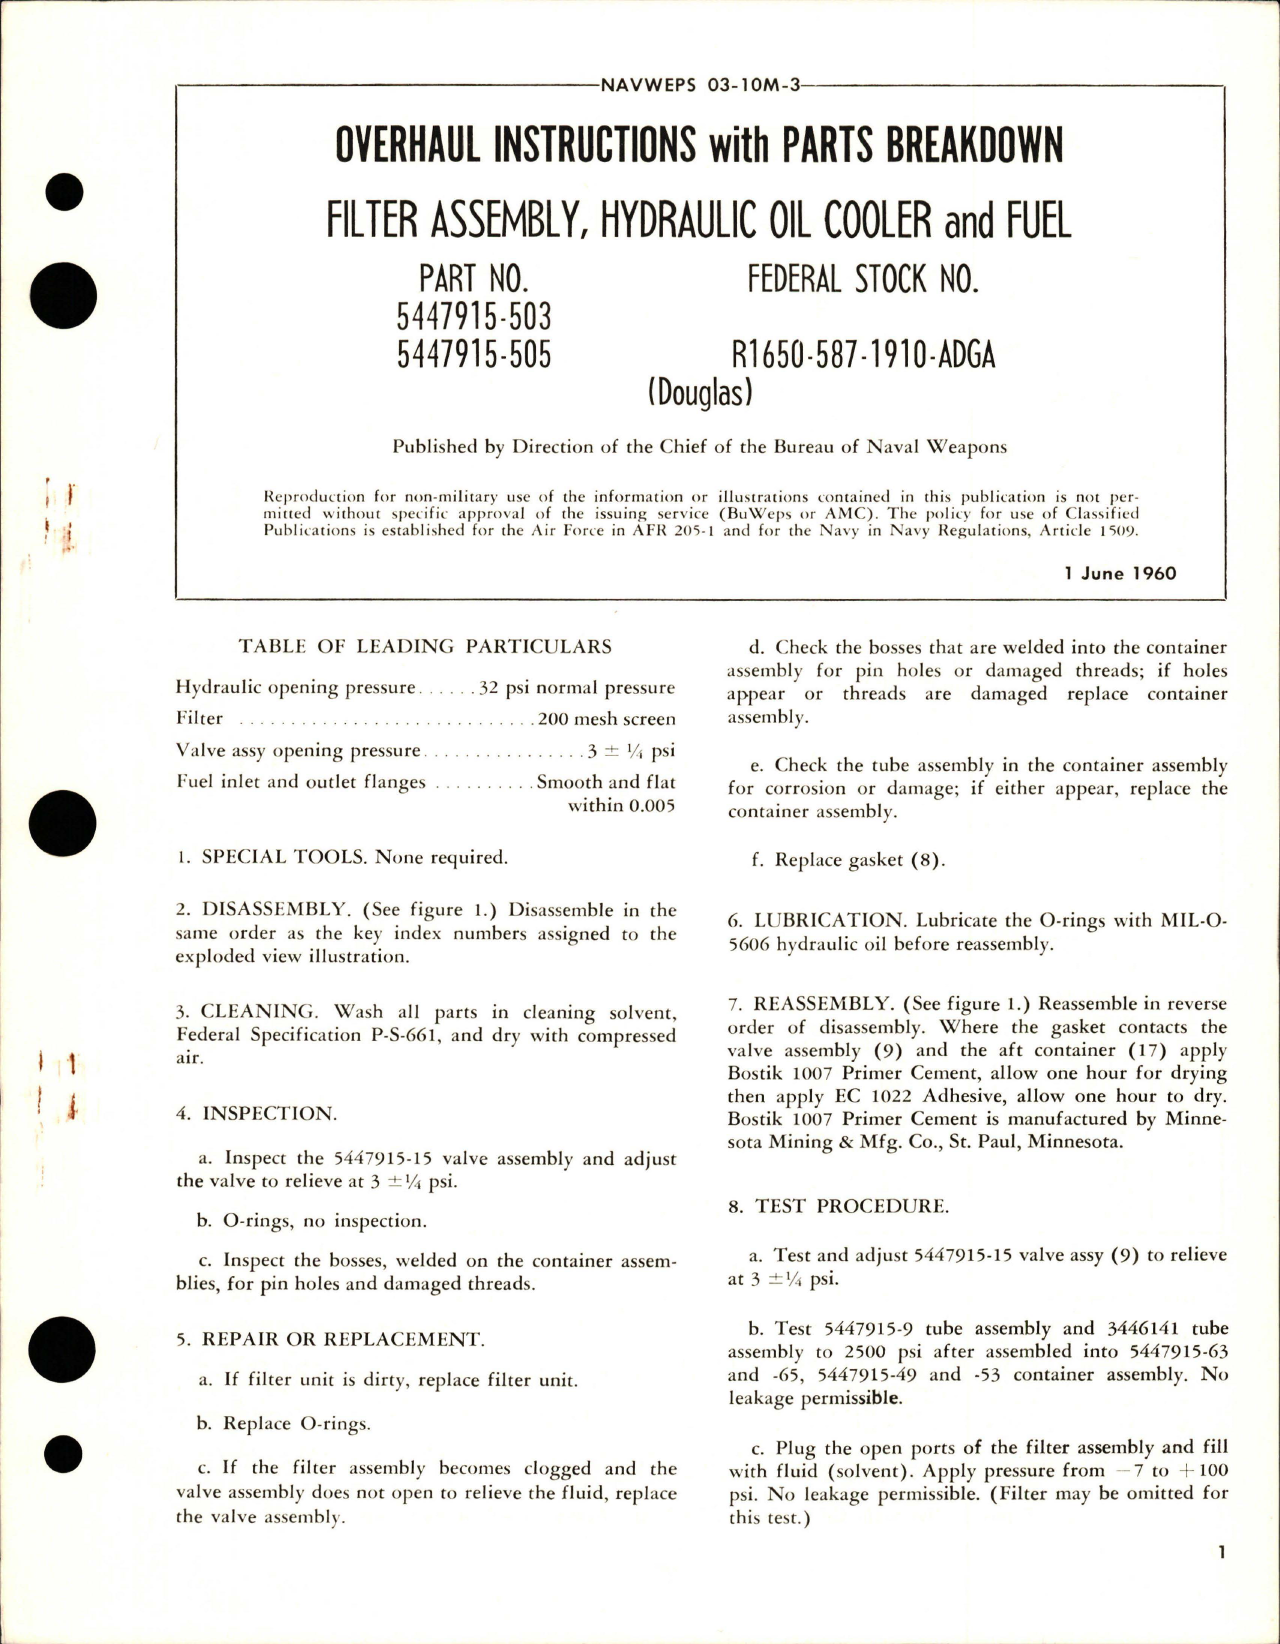 Sample page 1 from AirCorps Library document: Overhaul Instructions with Parts Breakdown for Hydraulic Oil Cooler and Fuel Filter Assembly - Parts 5447915-503 and 5447915-505